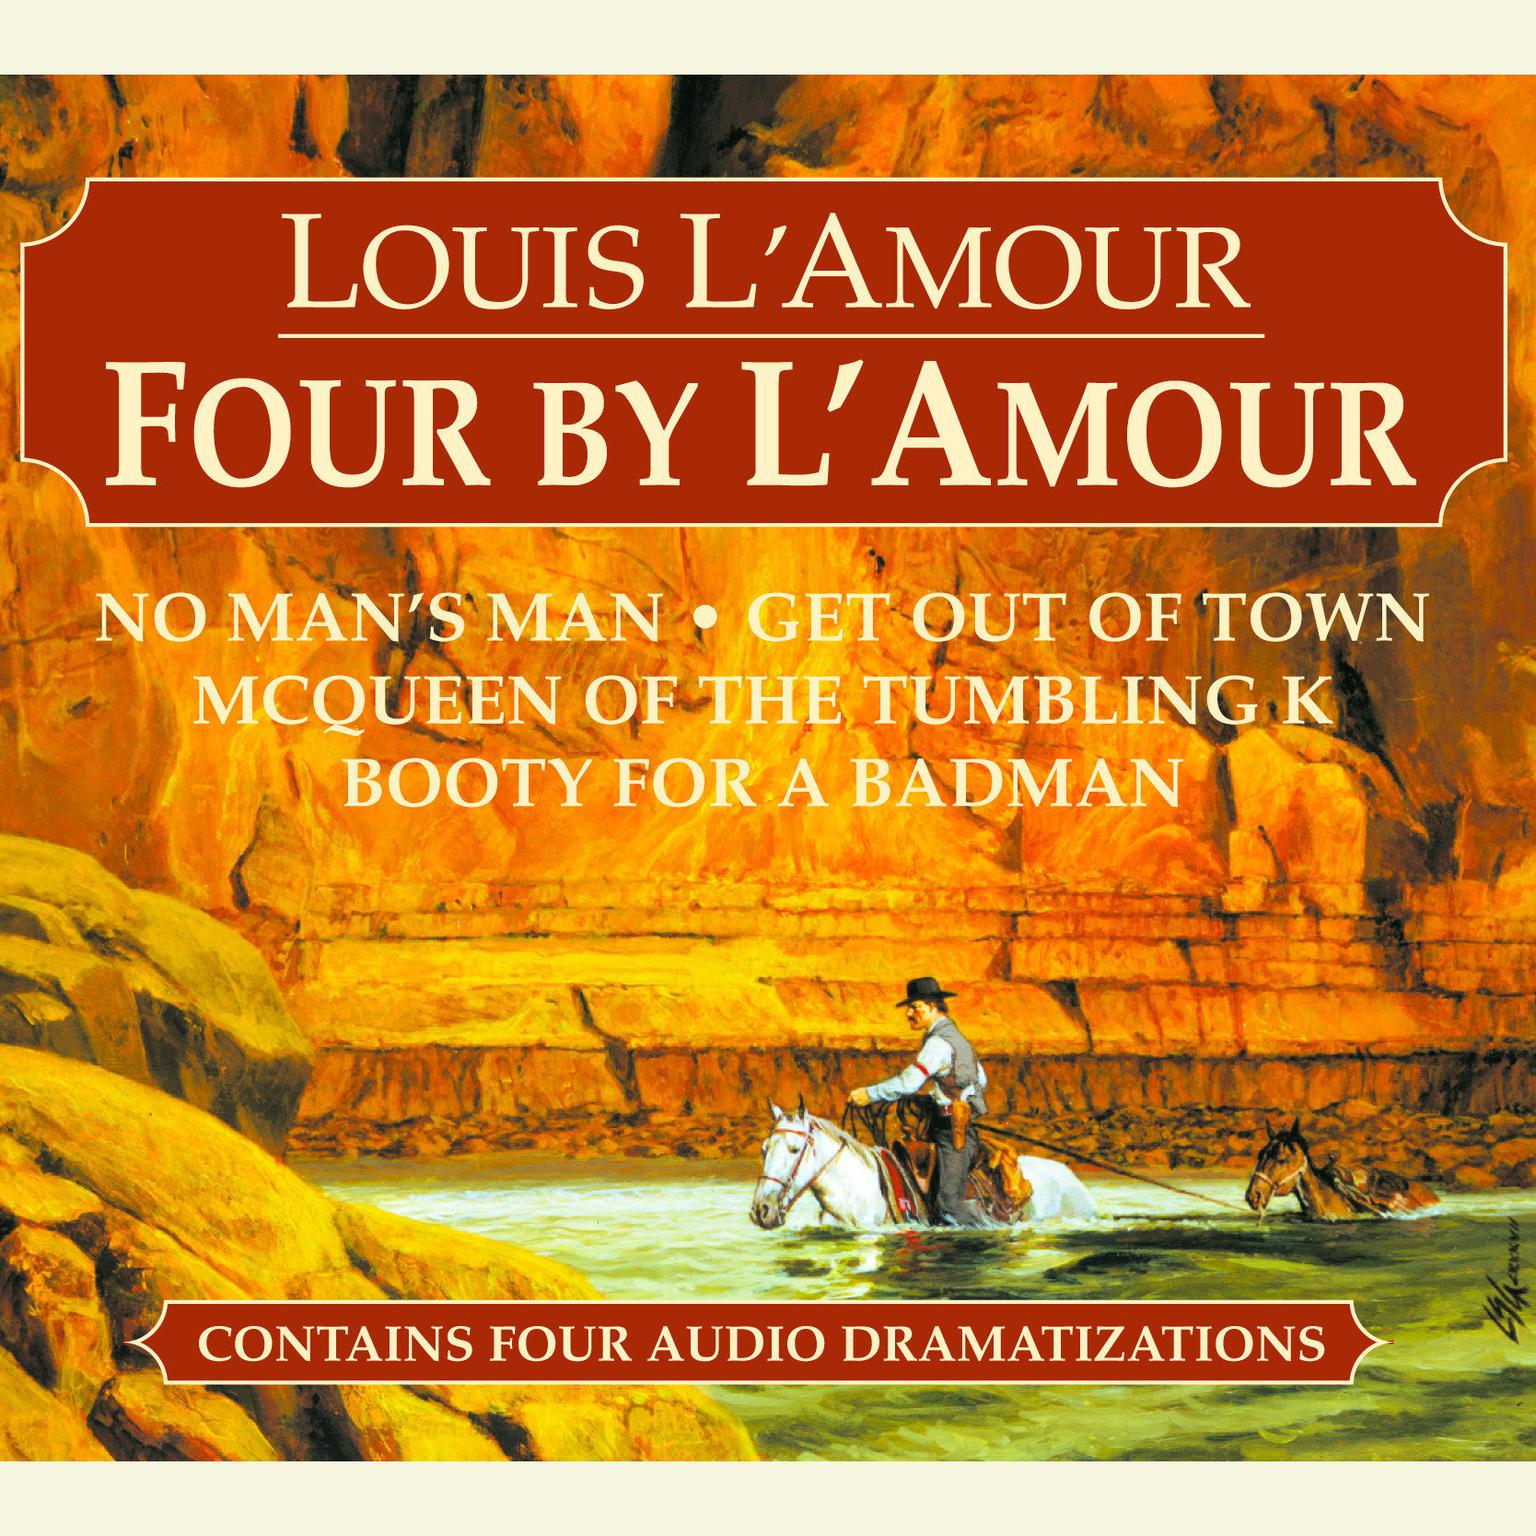 Four by LAmour (Abridged): No Mans Man, Get Out of Town, McQueen of the Tumbling K, Booty for a Bad Man Audiobook, by Louis L’Amour